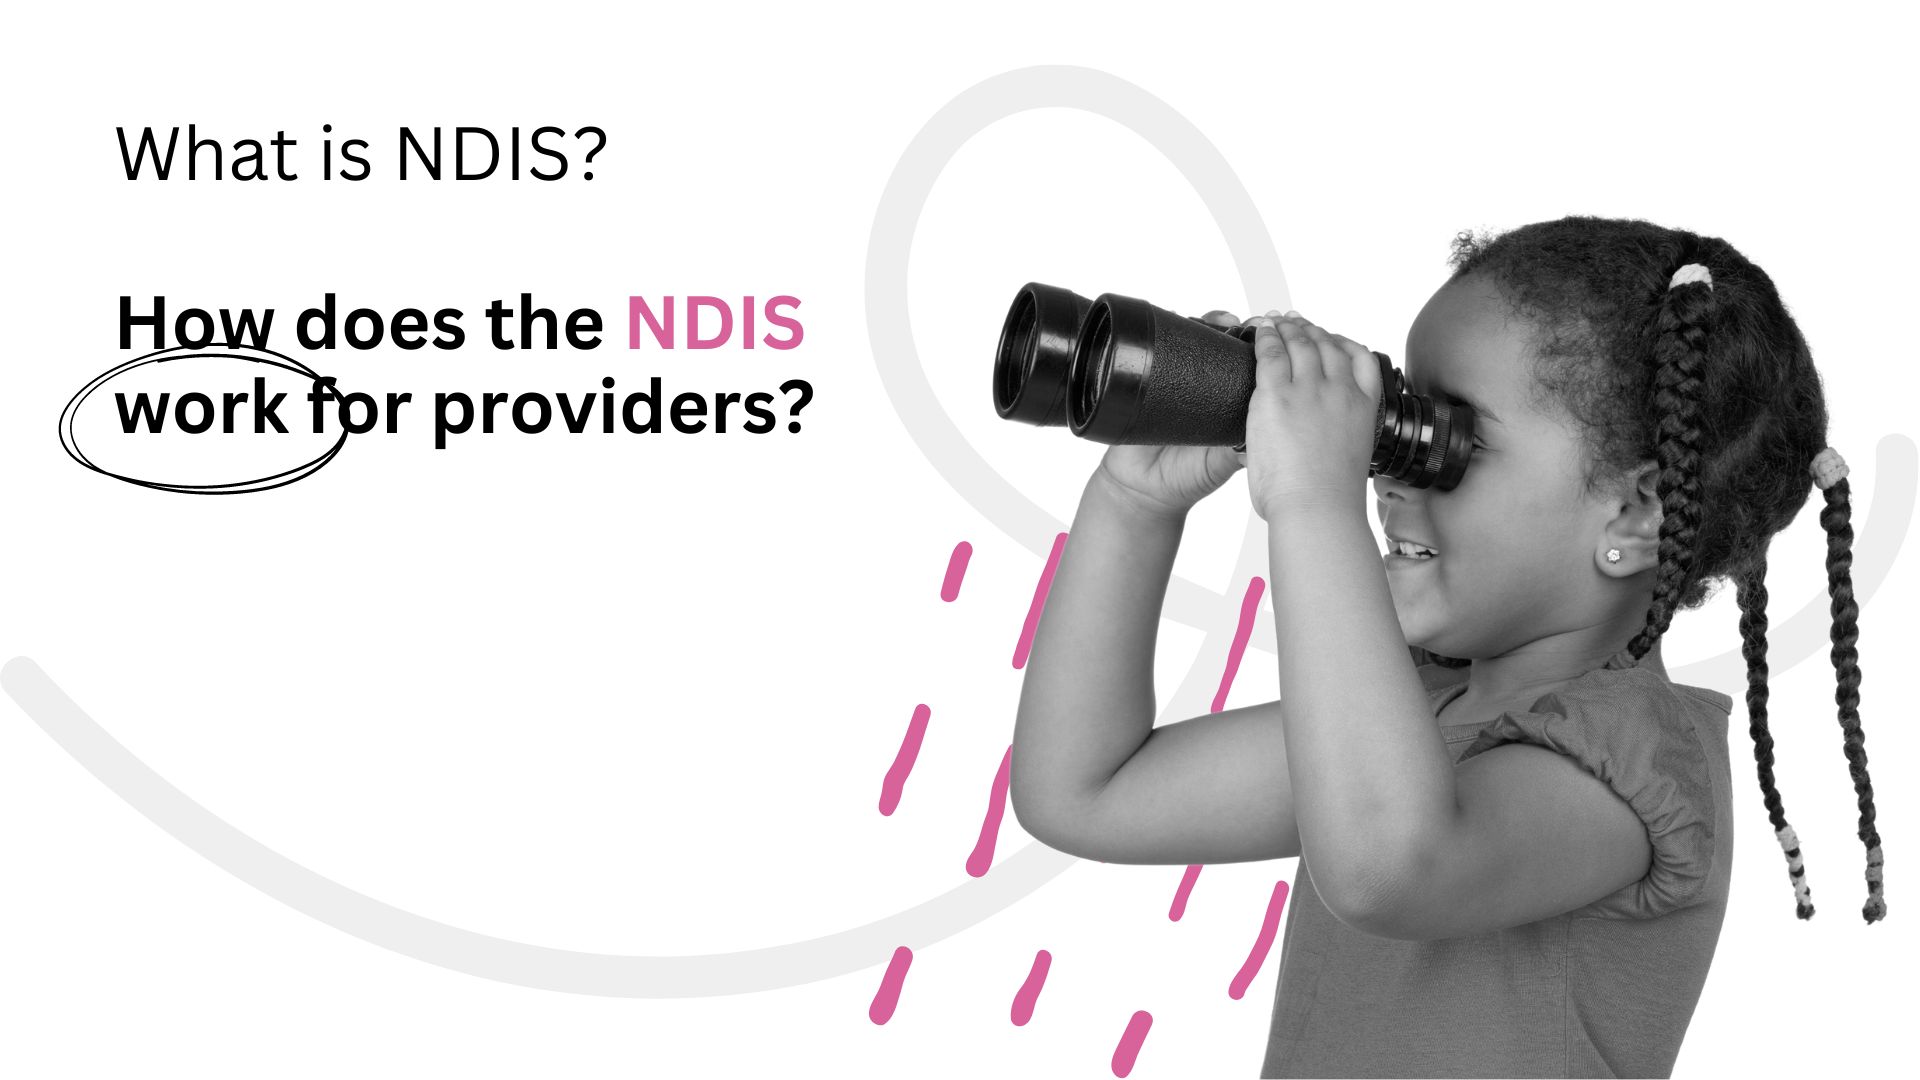 How does the NDIS work for providers